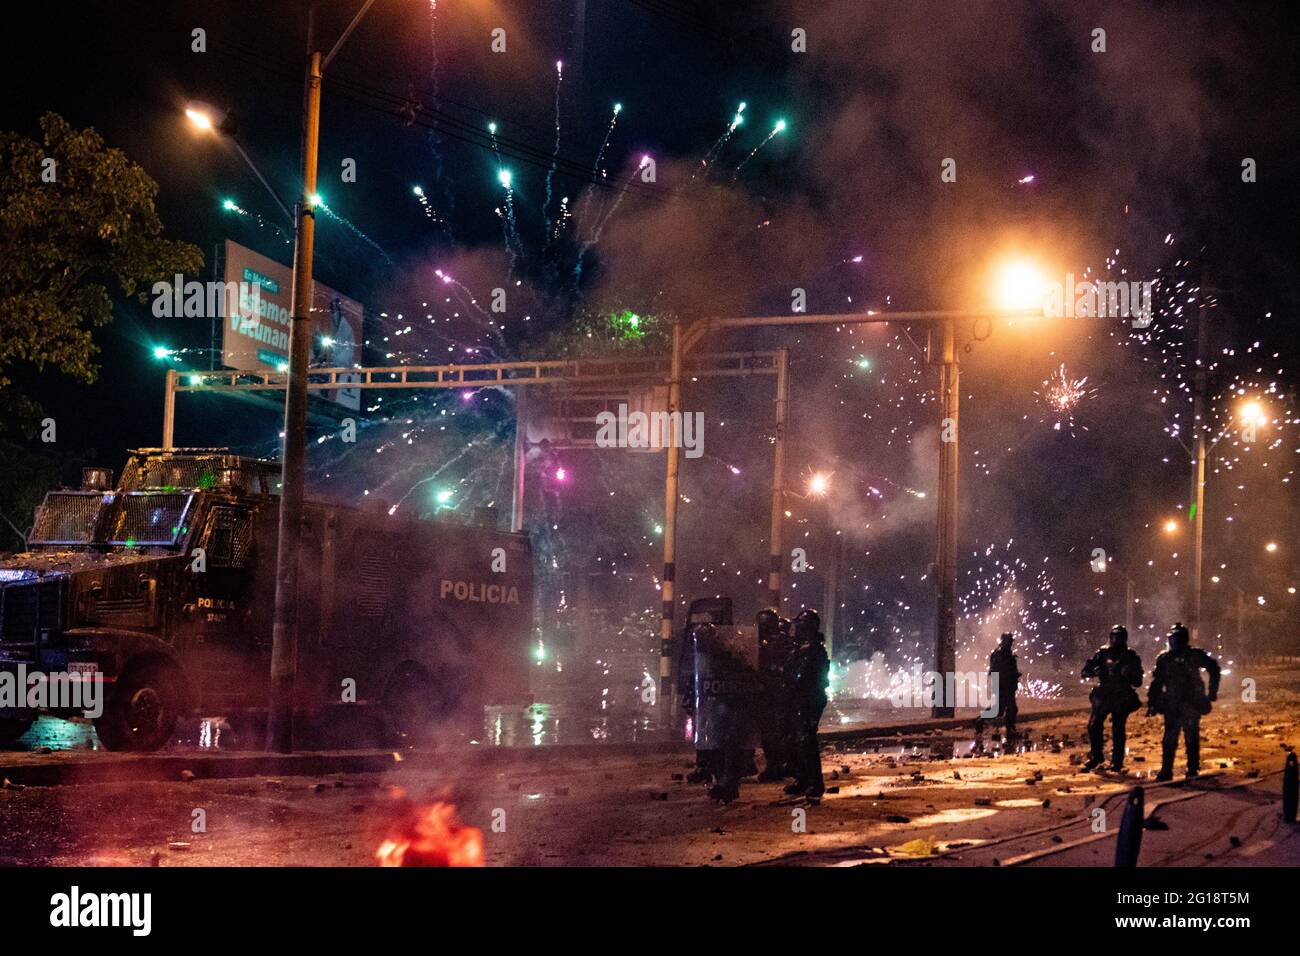 Fireworks used by demonstrators are used to distract and prevent tear gas from being shot by Colombia's riot police (ESMAD) as clashes between demonstrators and Colombia's riot police (ESMAD) erupt in Medellín, Colombia after several weeks of anti-government protest against President Ivan Duque's tax and health reforms and unrest and abuse of authority cases that leave at least 70 dead according to NGOs on June 4, 2021. Stock Photo